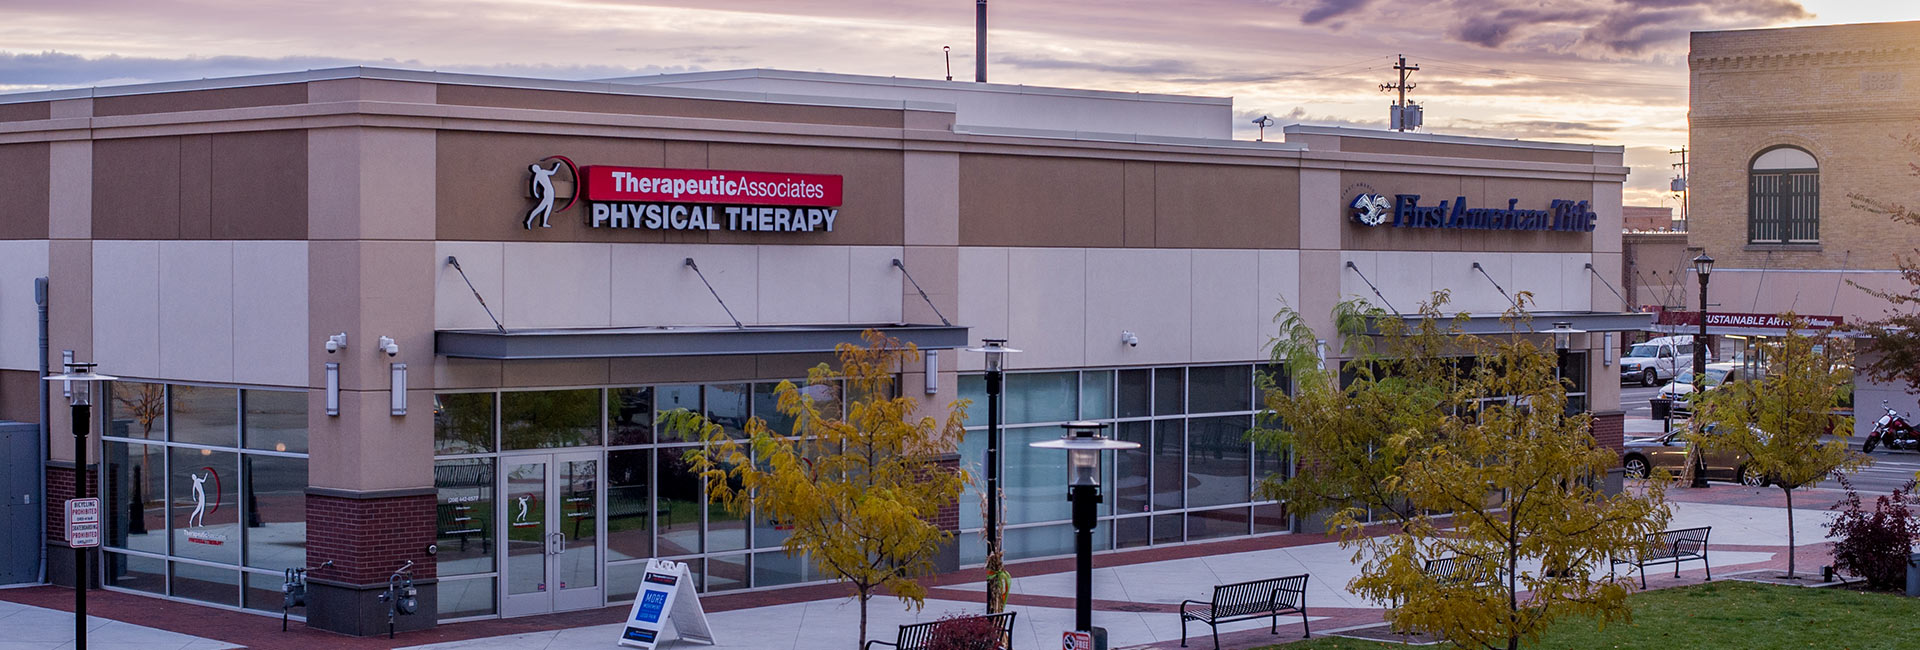 Therapeutic Associates Physical Therapy - Nampa